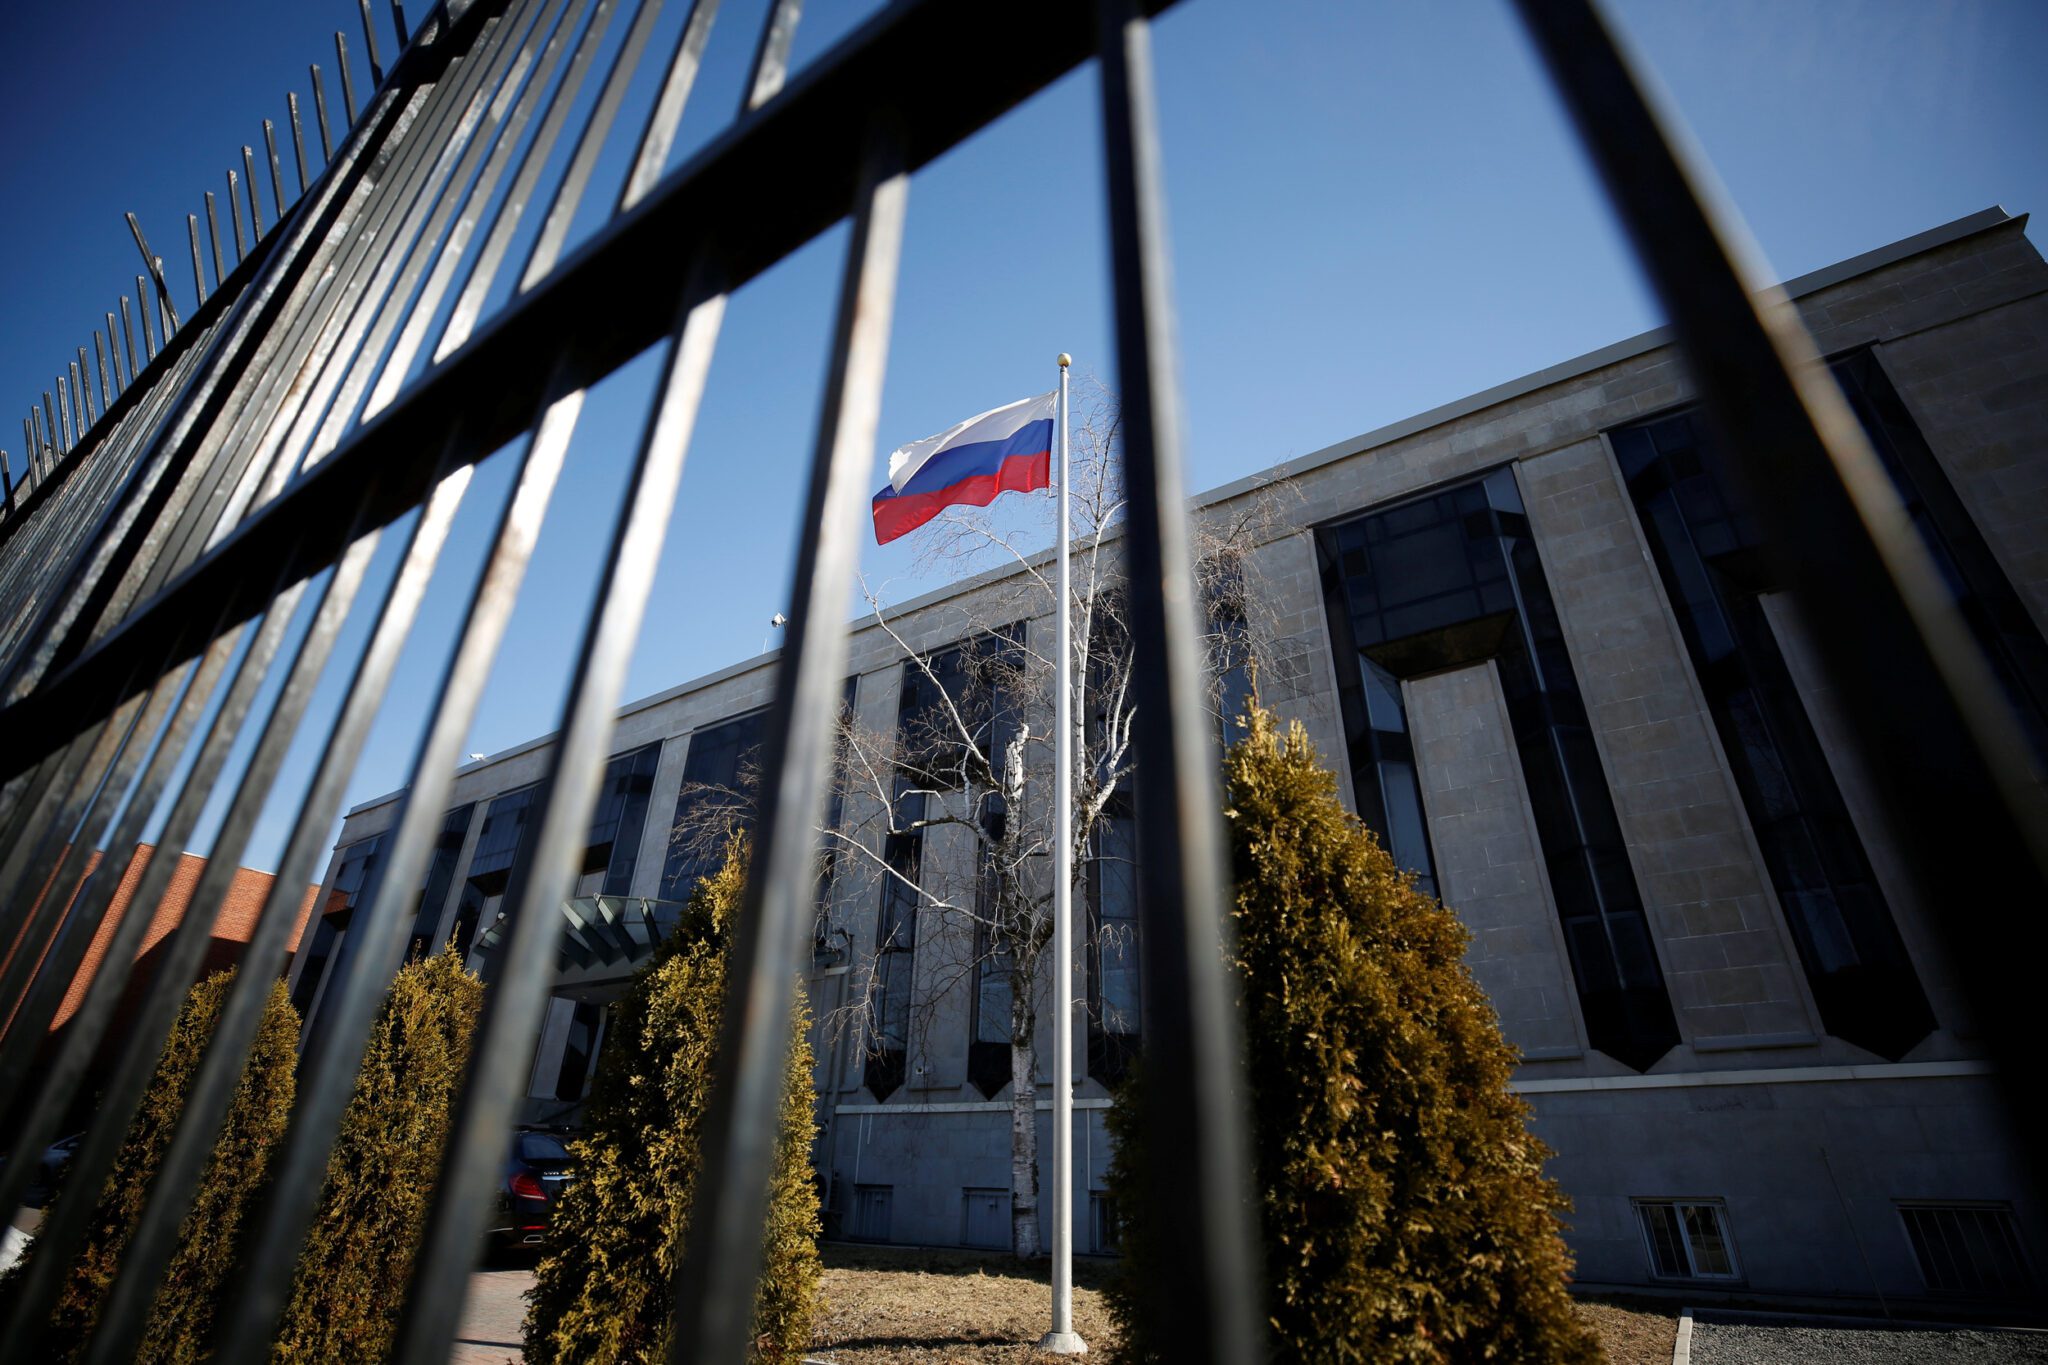 The Russian flag outside of the country's embassy in Ottawa. Source: Reuters